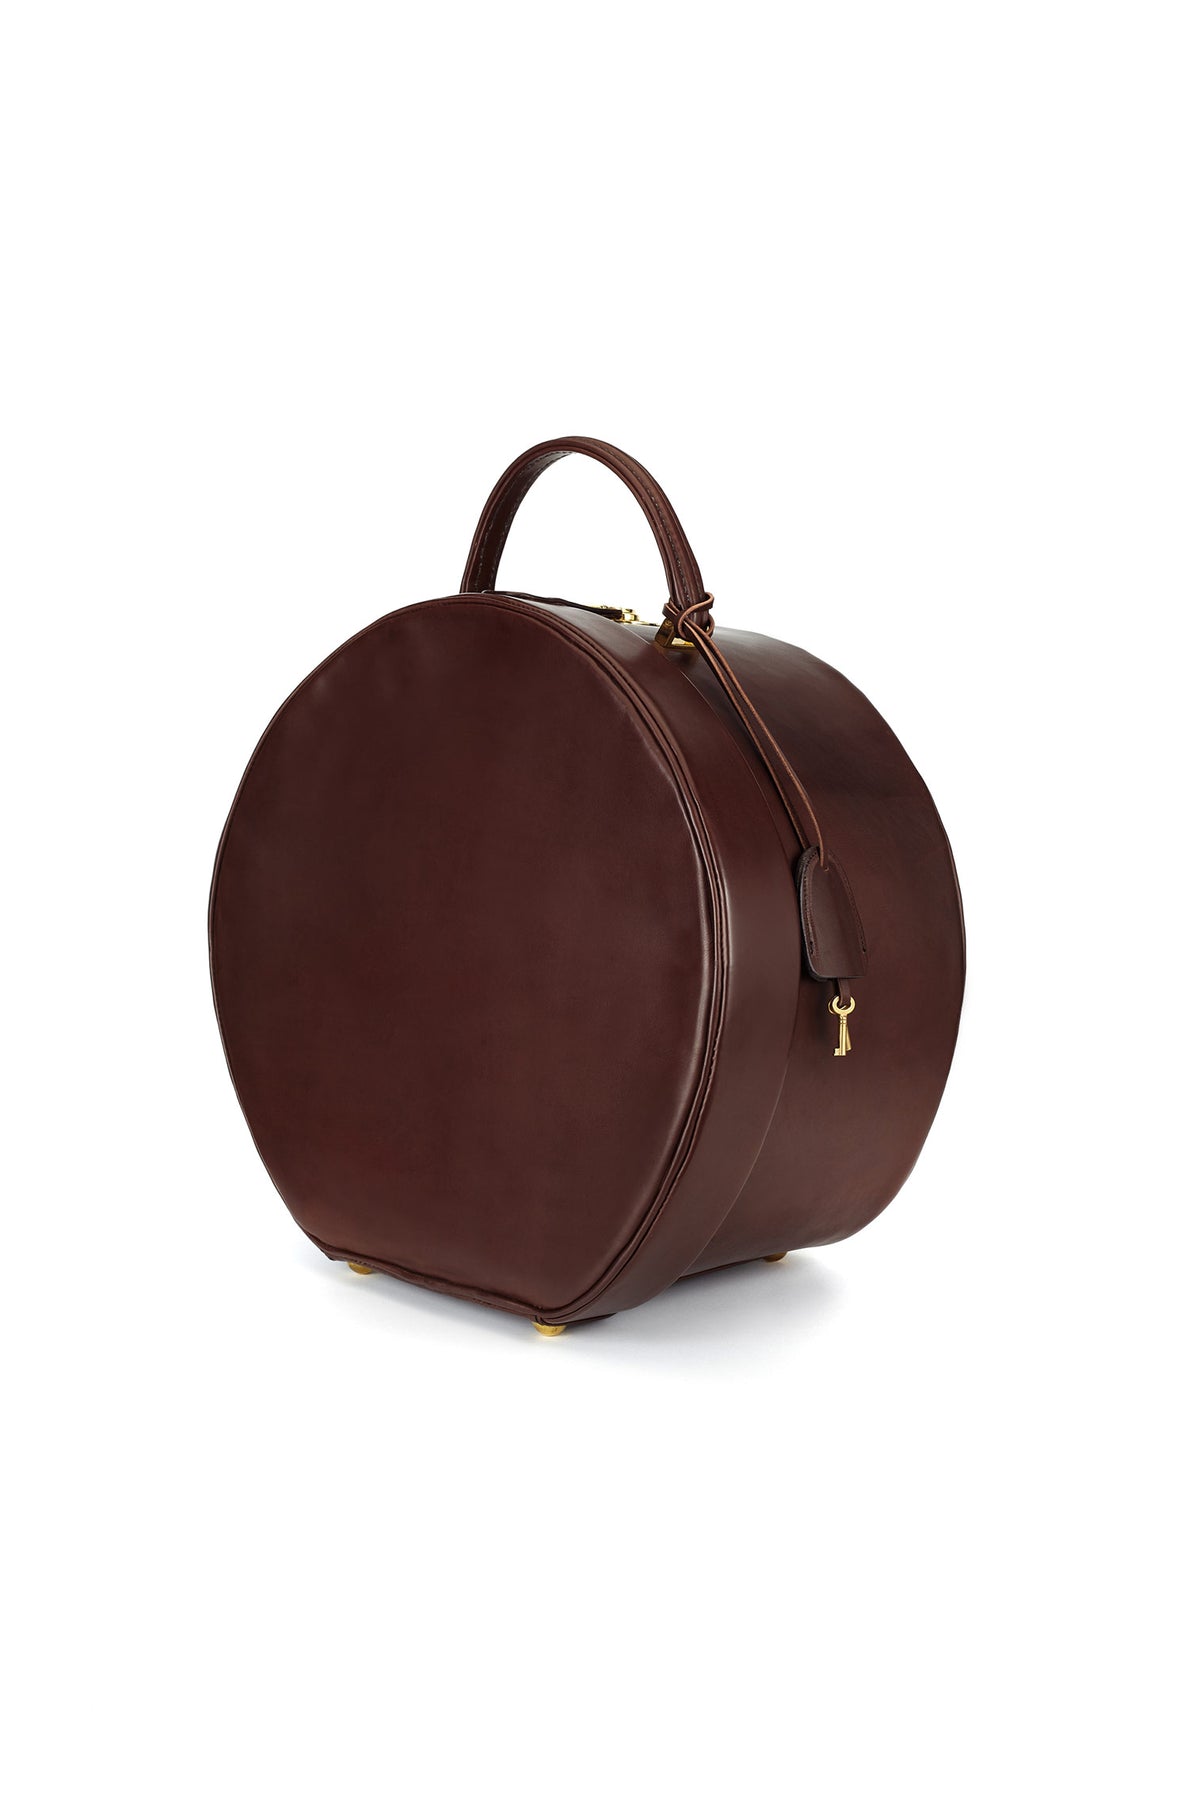 Hat box prestige brown leather - Traclet Reference : 202